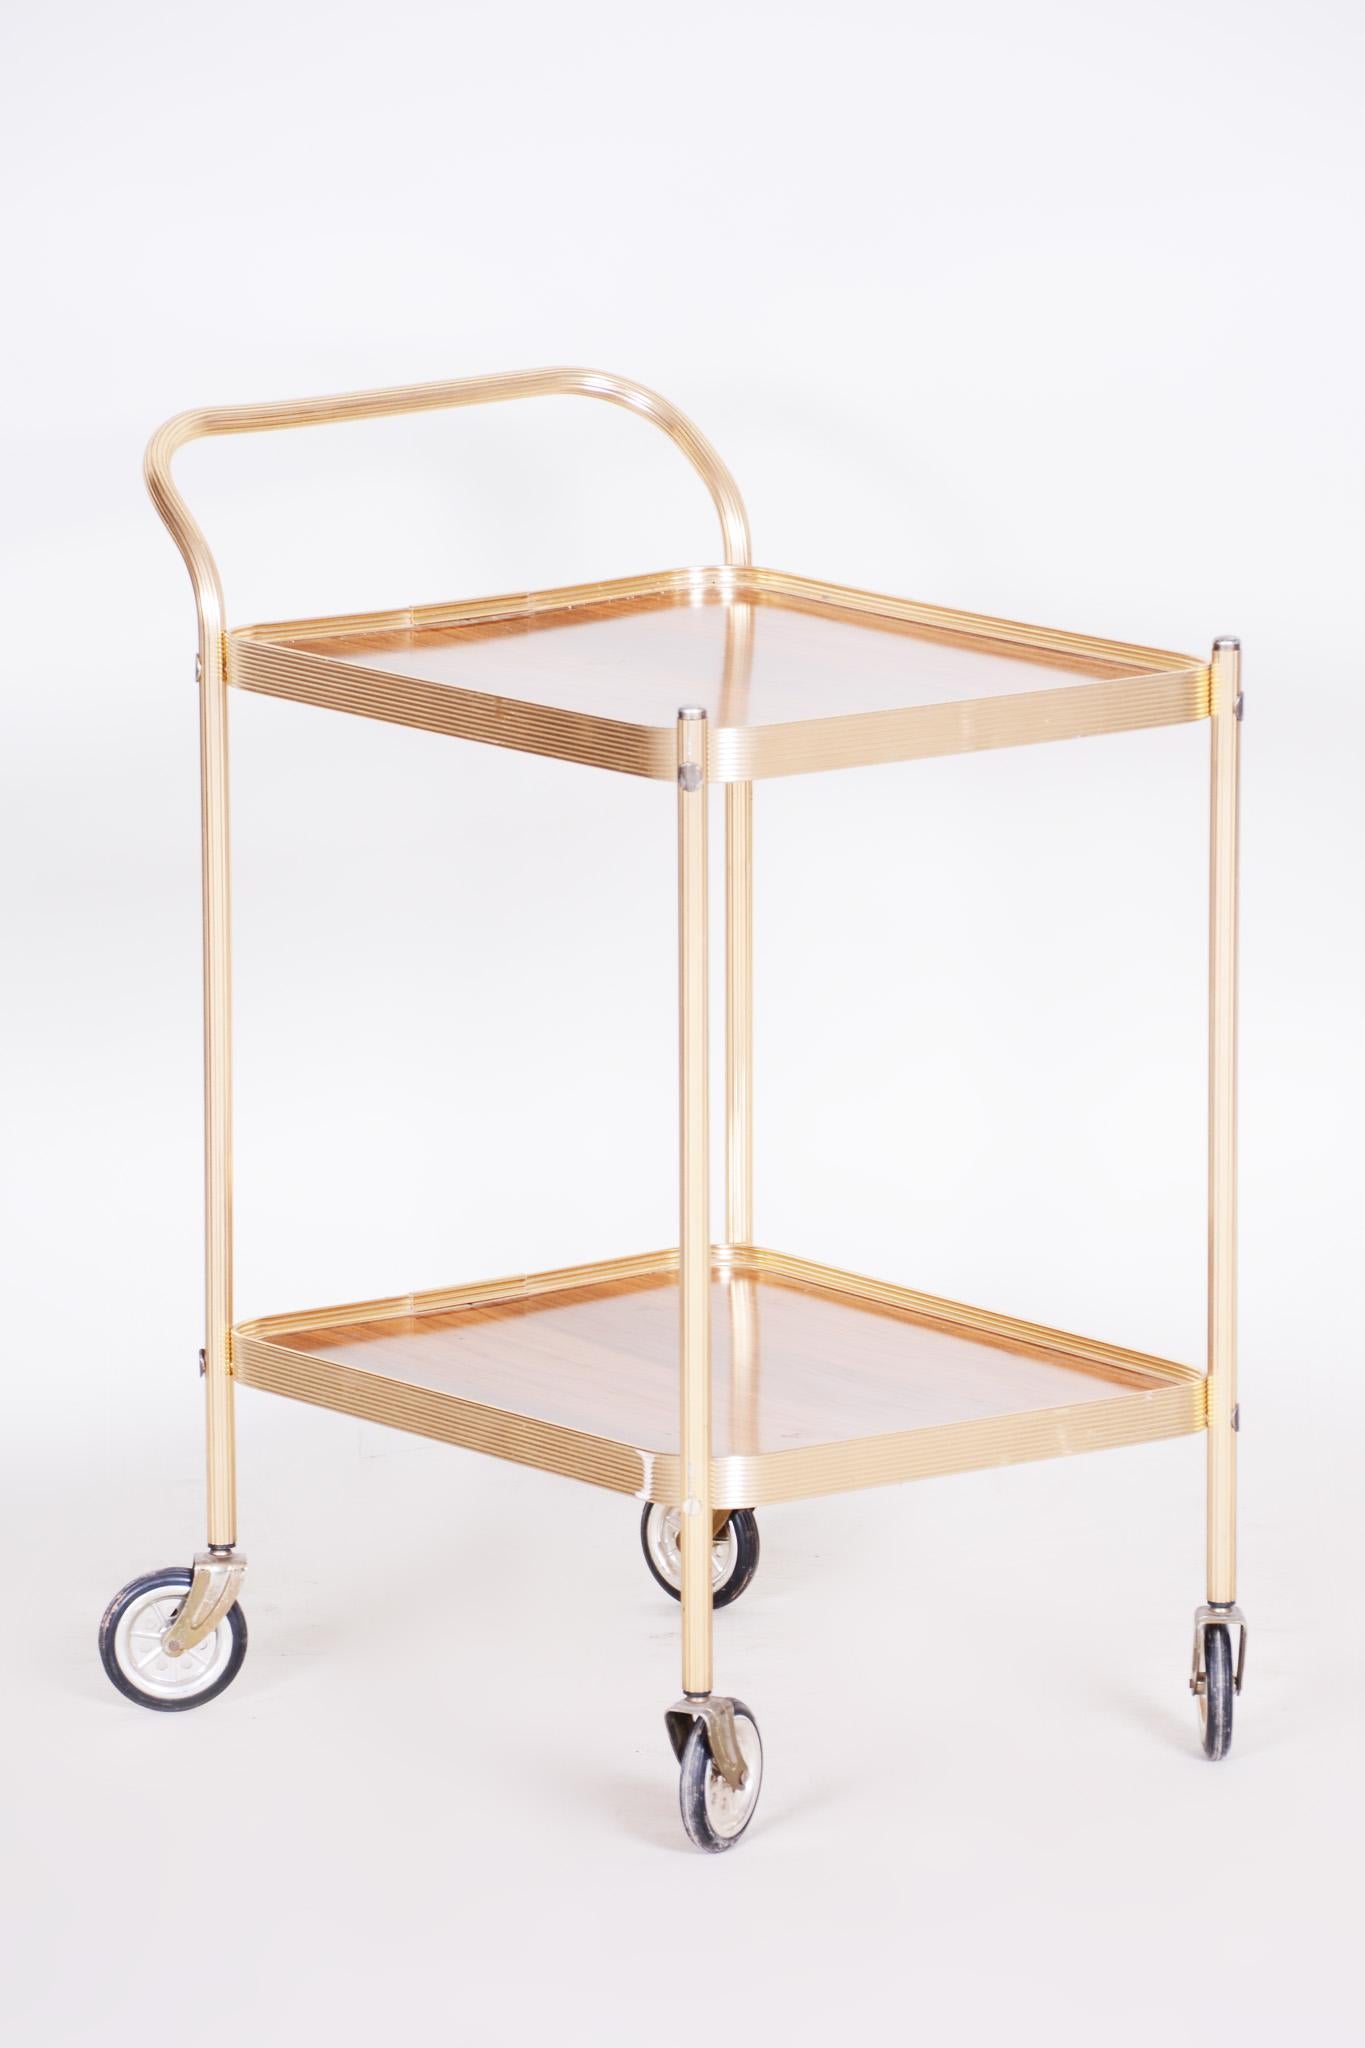 20th Century French Art Deco Trolley, Made Out of Brass Original Condition 1950s In Good Condition For Sale In Horomerice, CZ